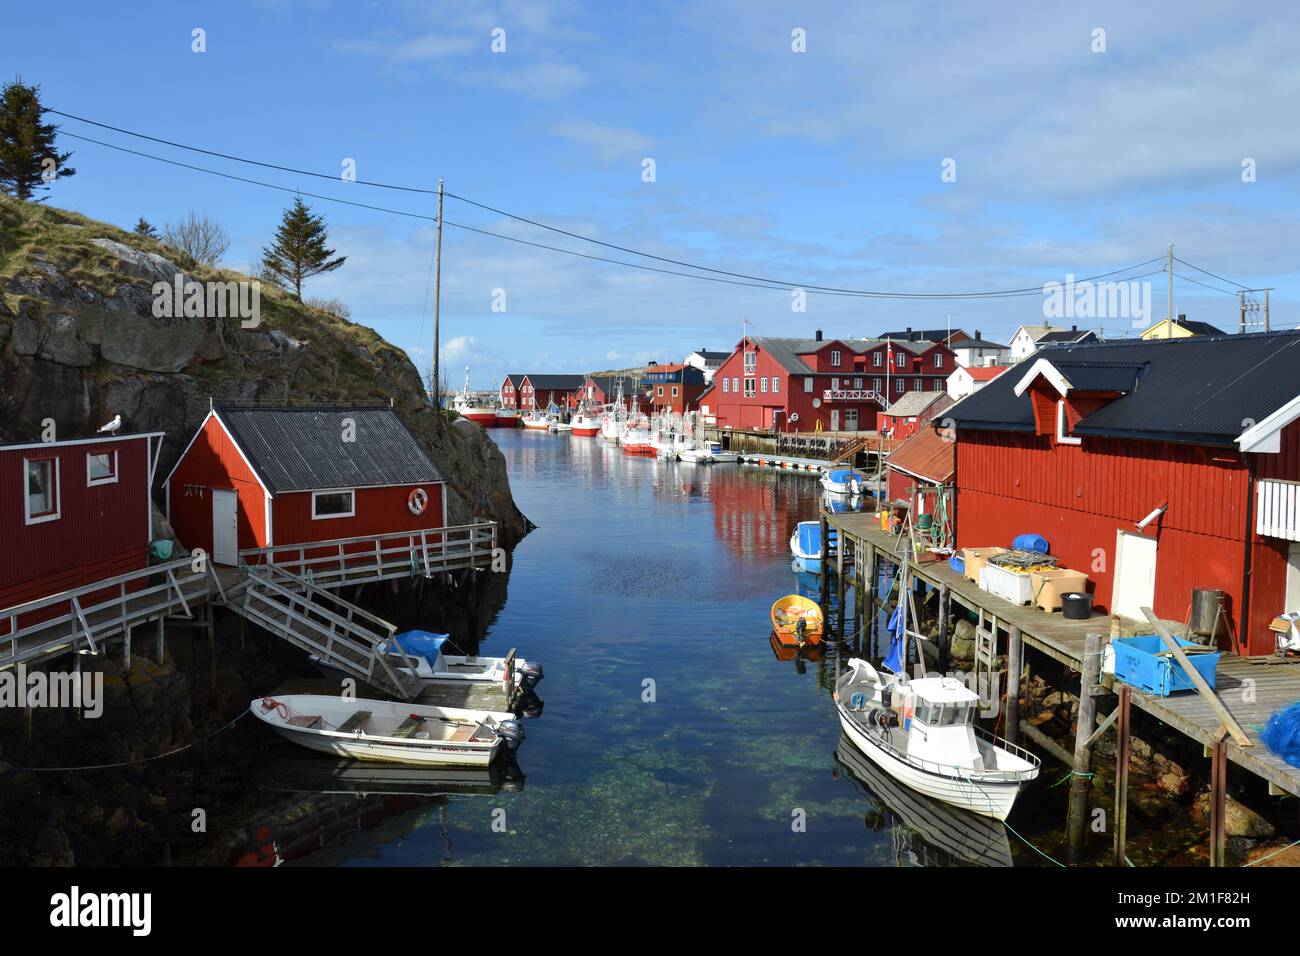 Boats and red boat houses at fishing village in small bay Stock Photo